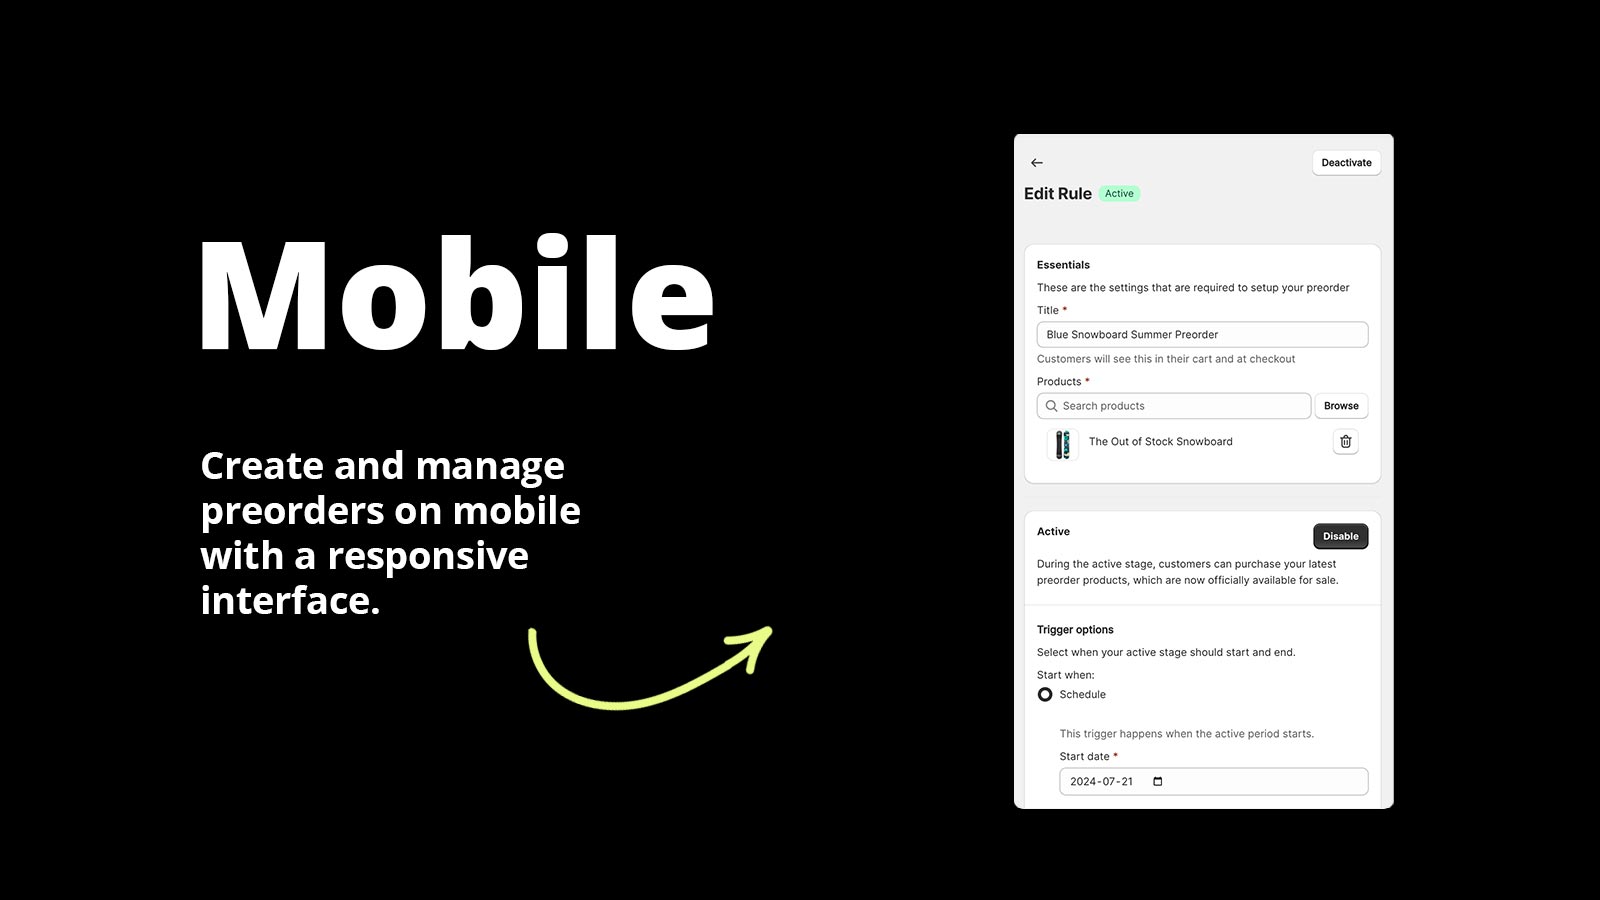 Mobile - Create and manage preorders on mobile